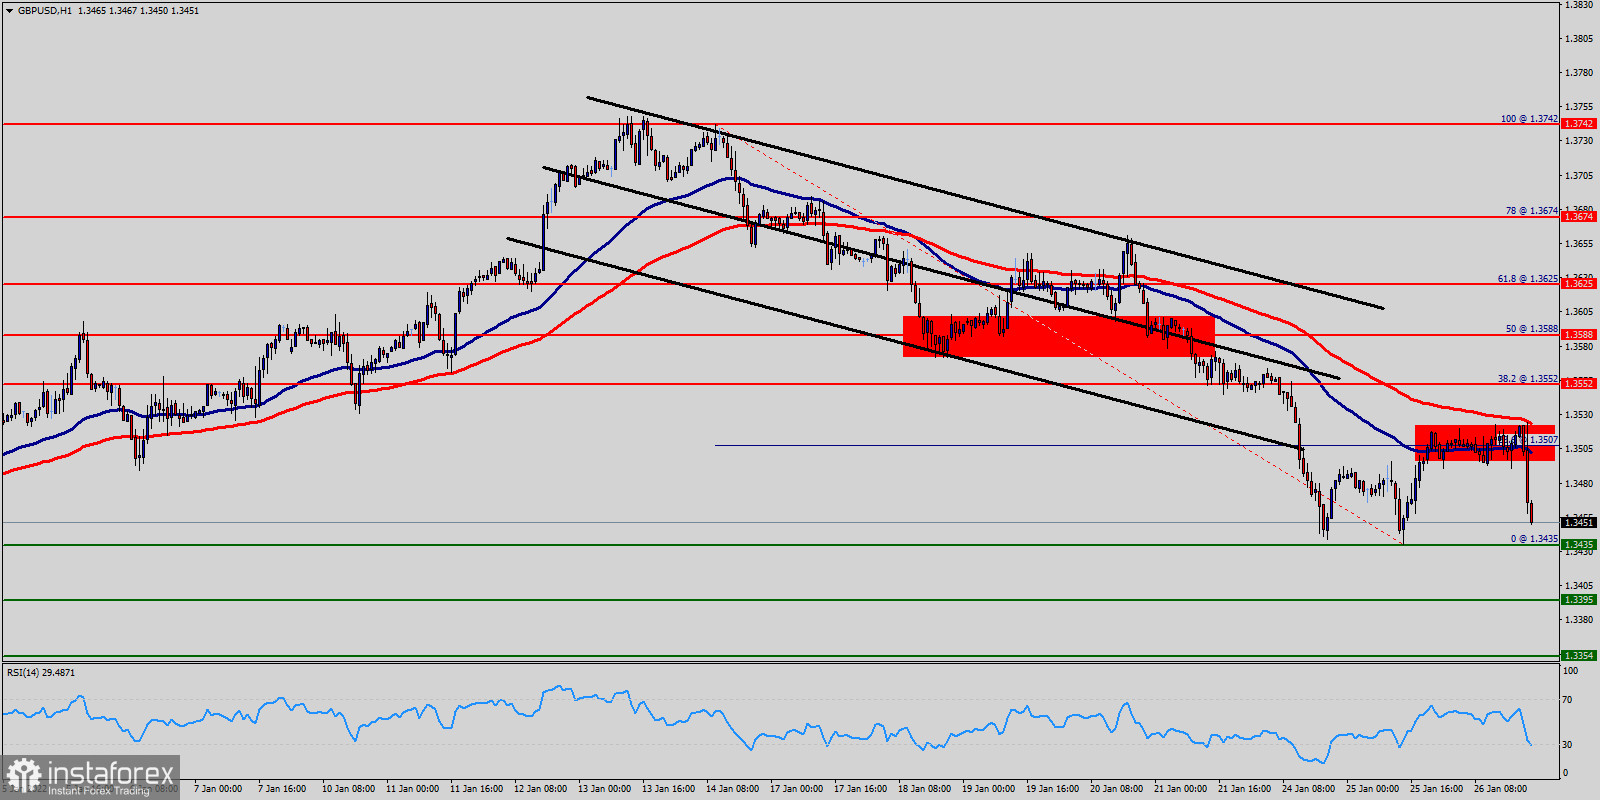 Technical analysis of GBP/USD for January 26, 2022